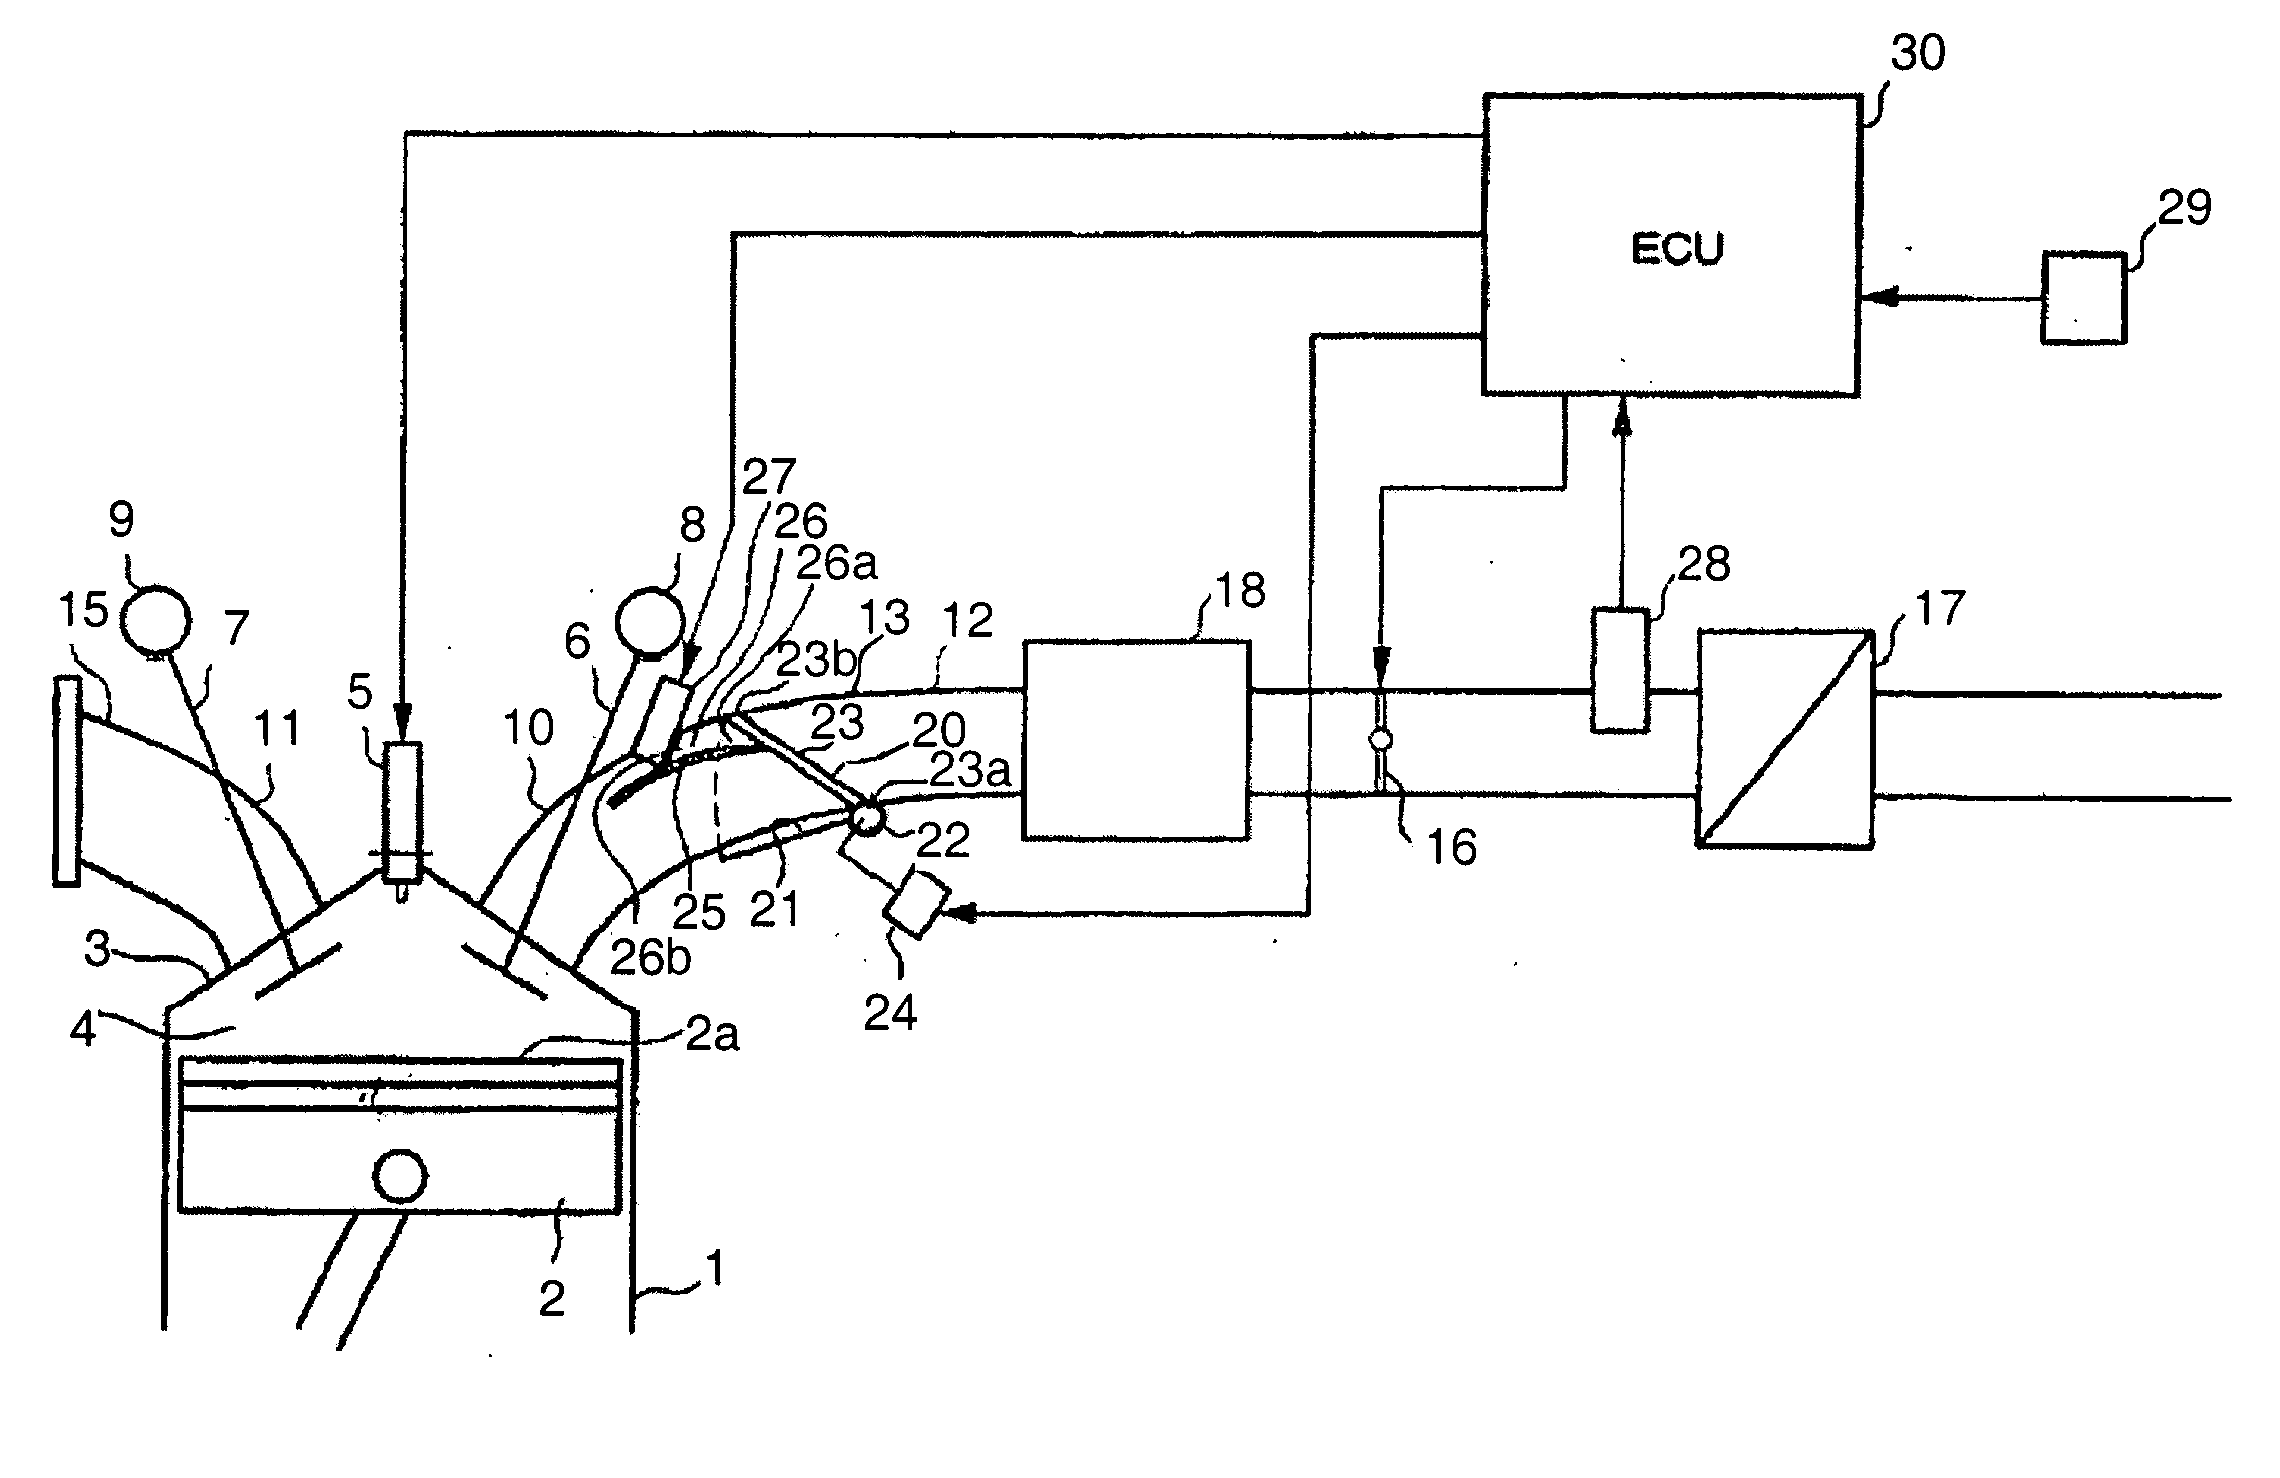 Internal combustion engine air intake structure